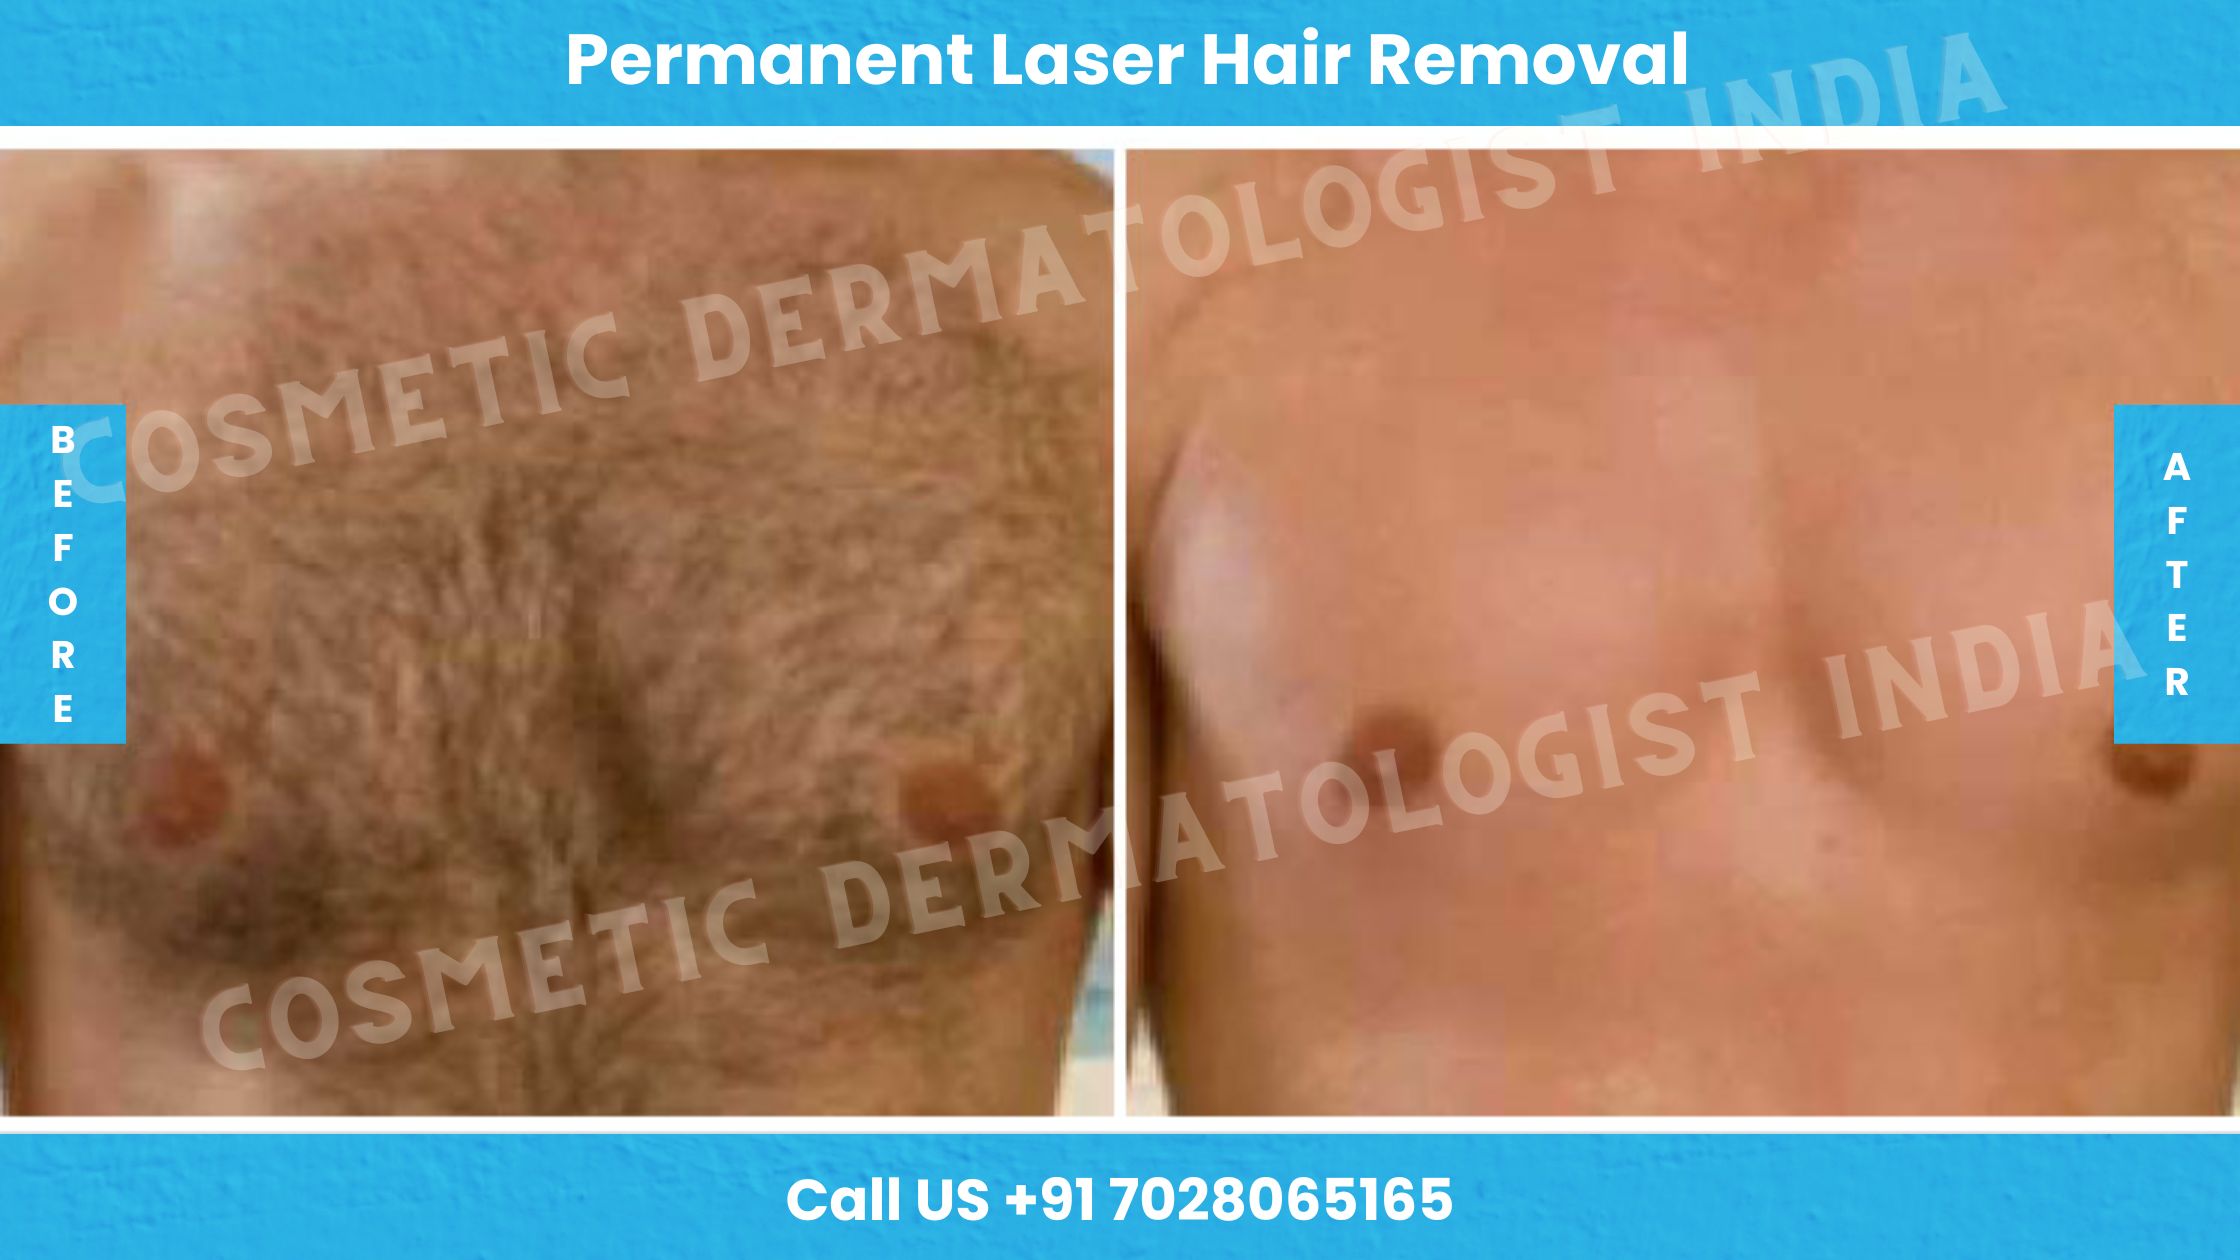 Before and After Images of Permanent Laser Hair Removal Treatment